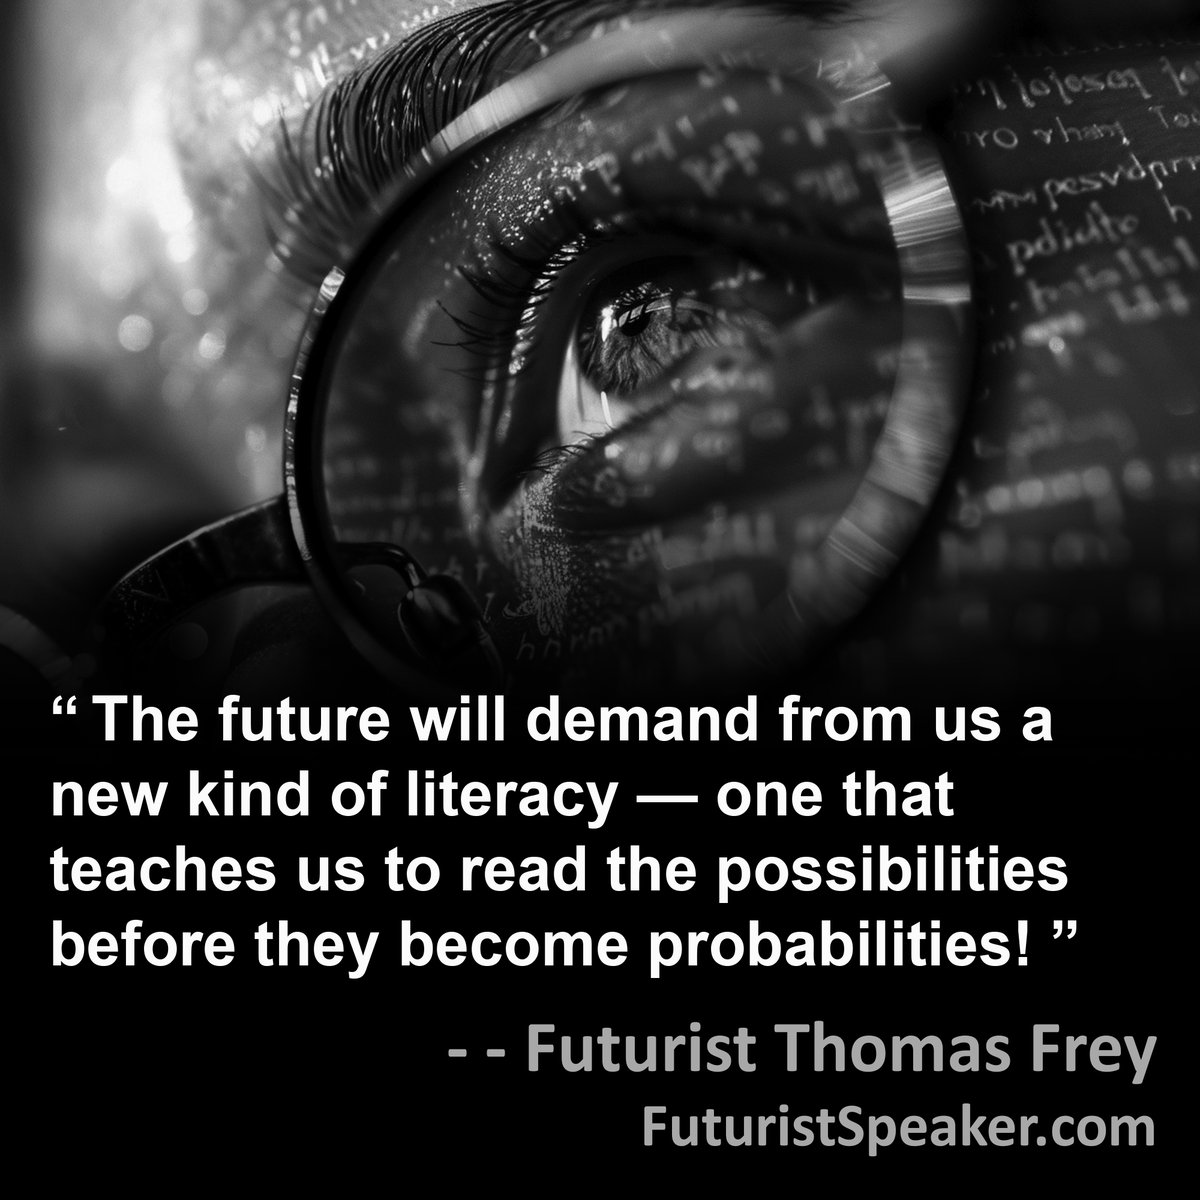 'The future will demand from us a new kind of literacy — one that teaches us to read the possibilities before they become probabilities!' by Futurist Thomas Frey use the following column. FuturistSpeaker.com #foresight #predictions #futuretrends #futureofwork #futurejobs